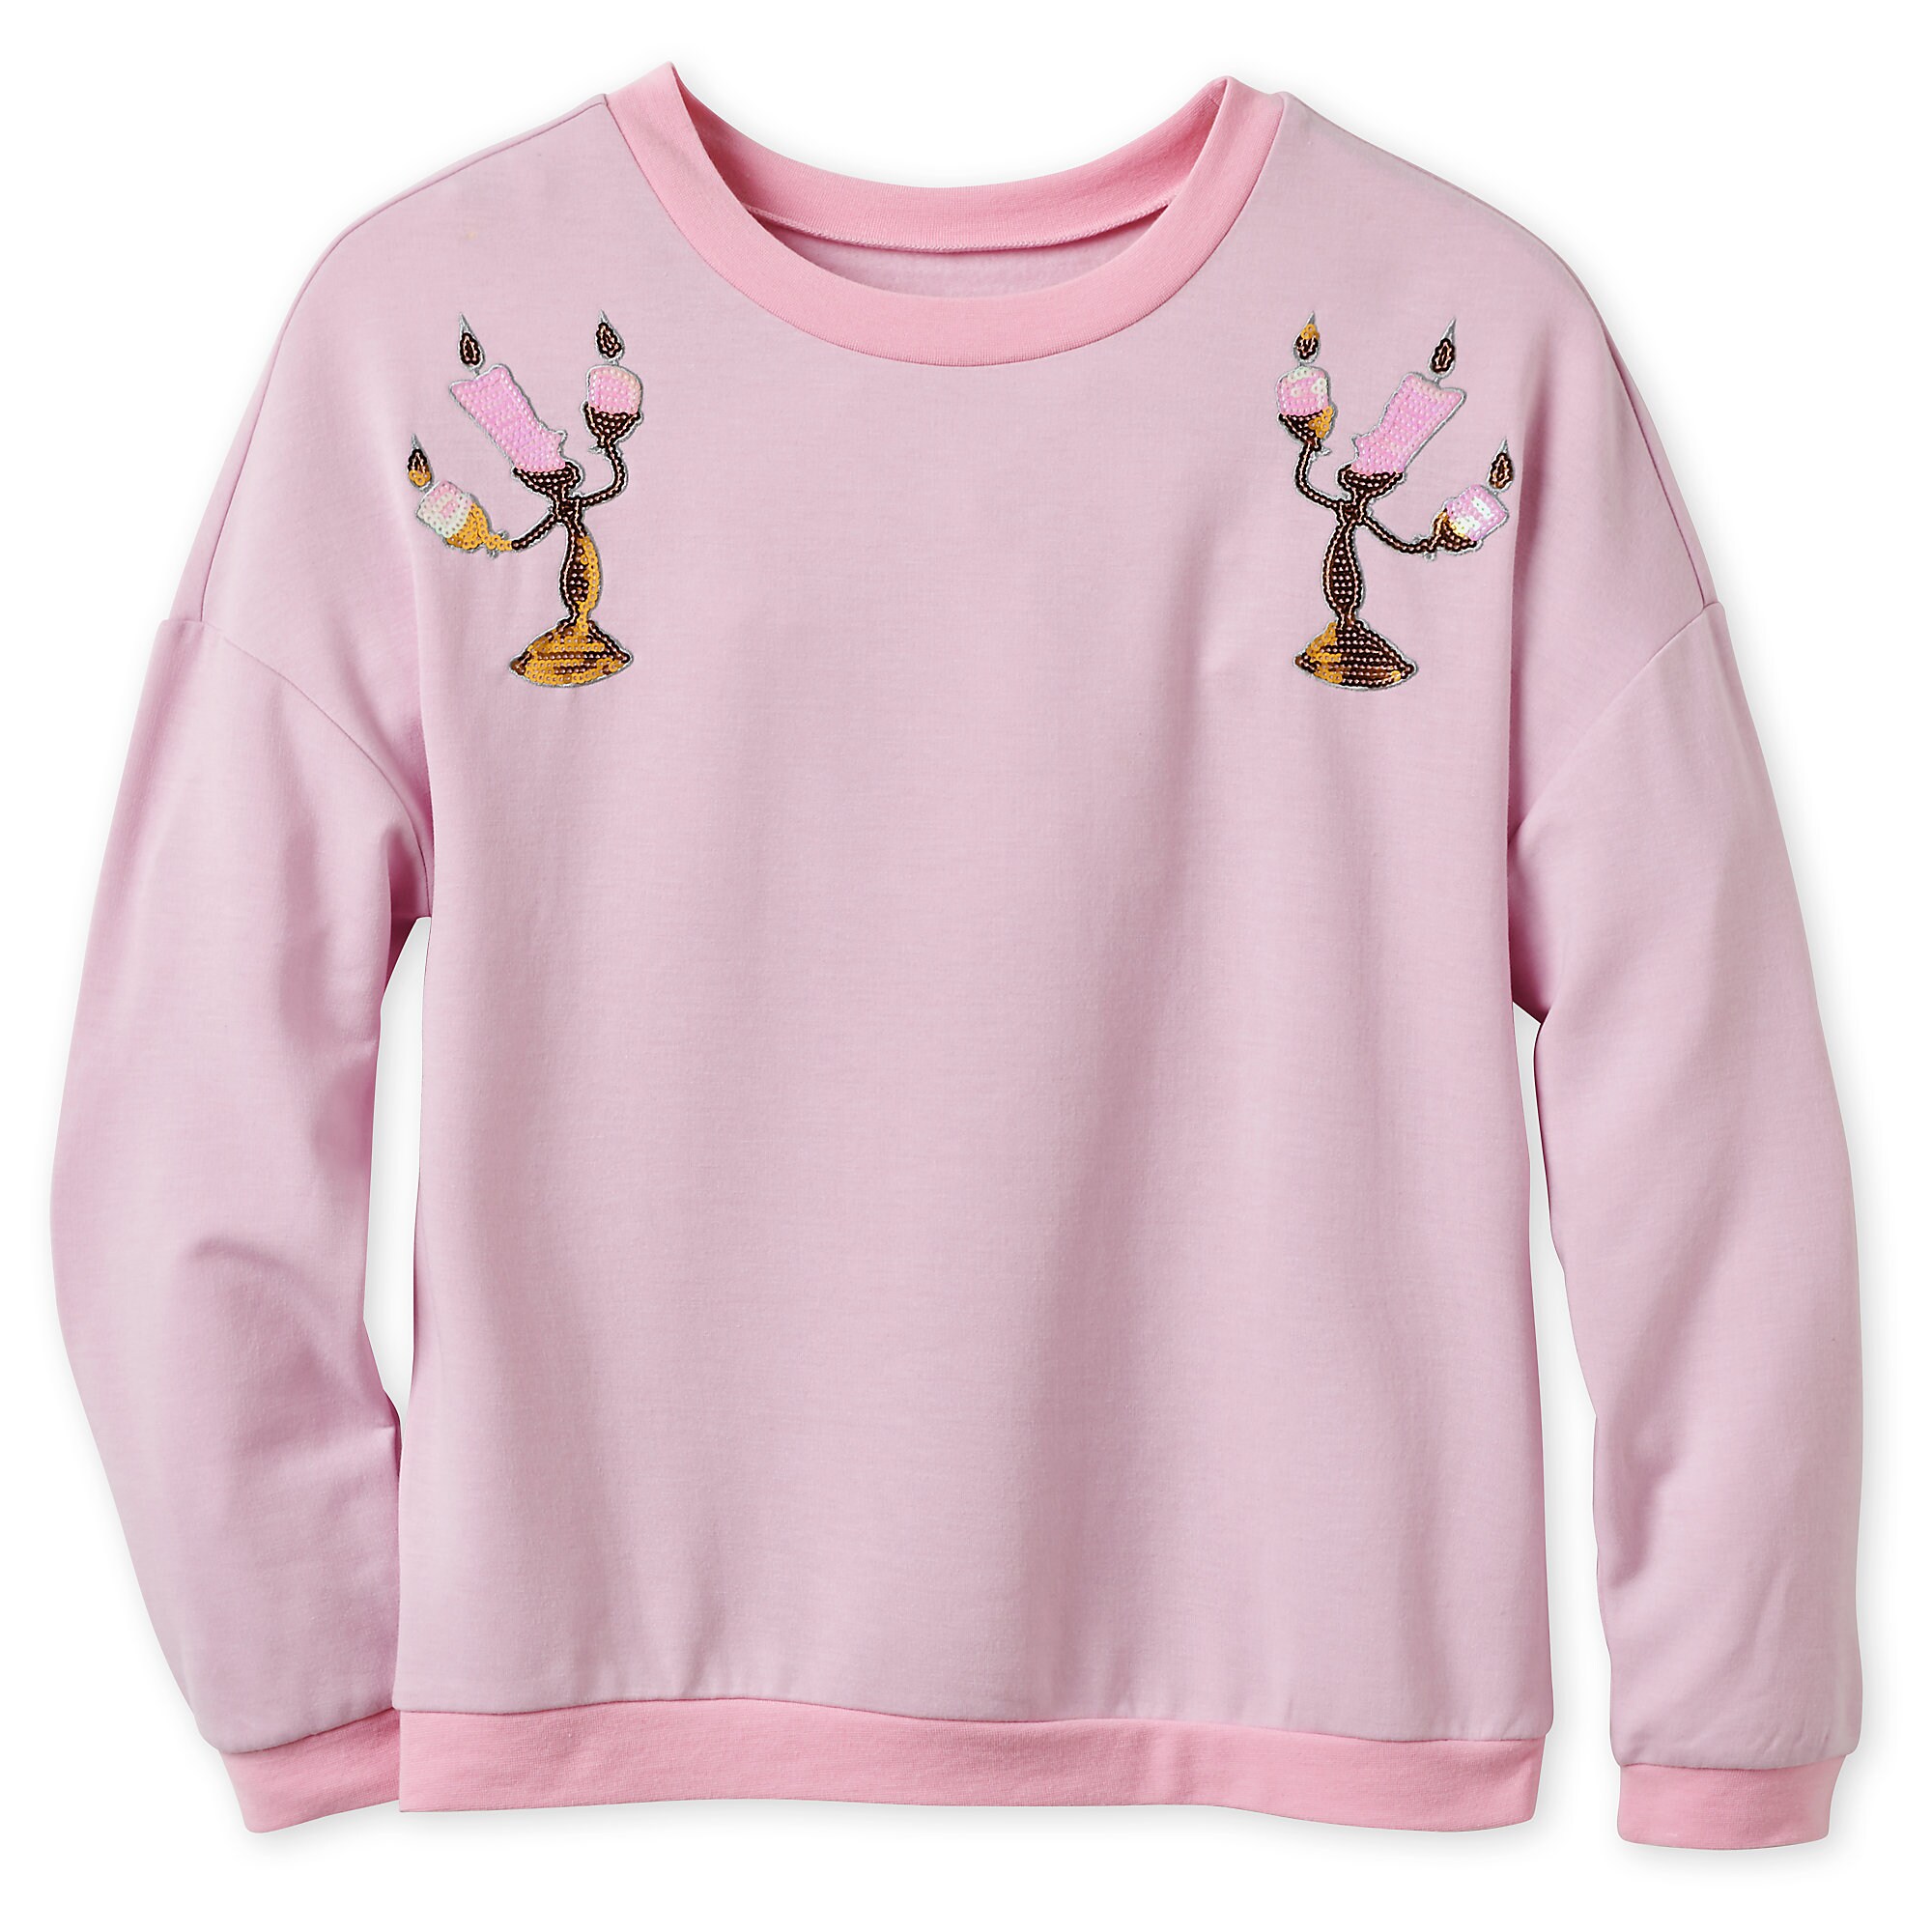 Lumiere Sequined Long Sleeve Pullover for Women - Beauty and the Beast